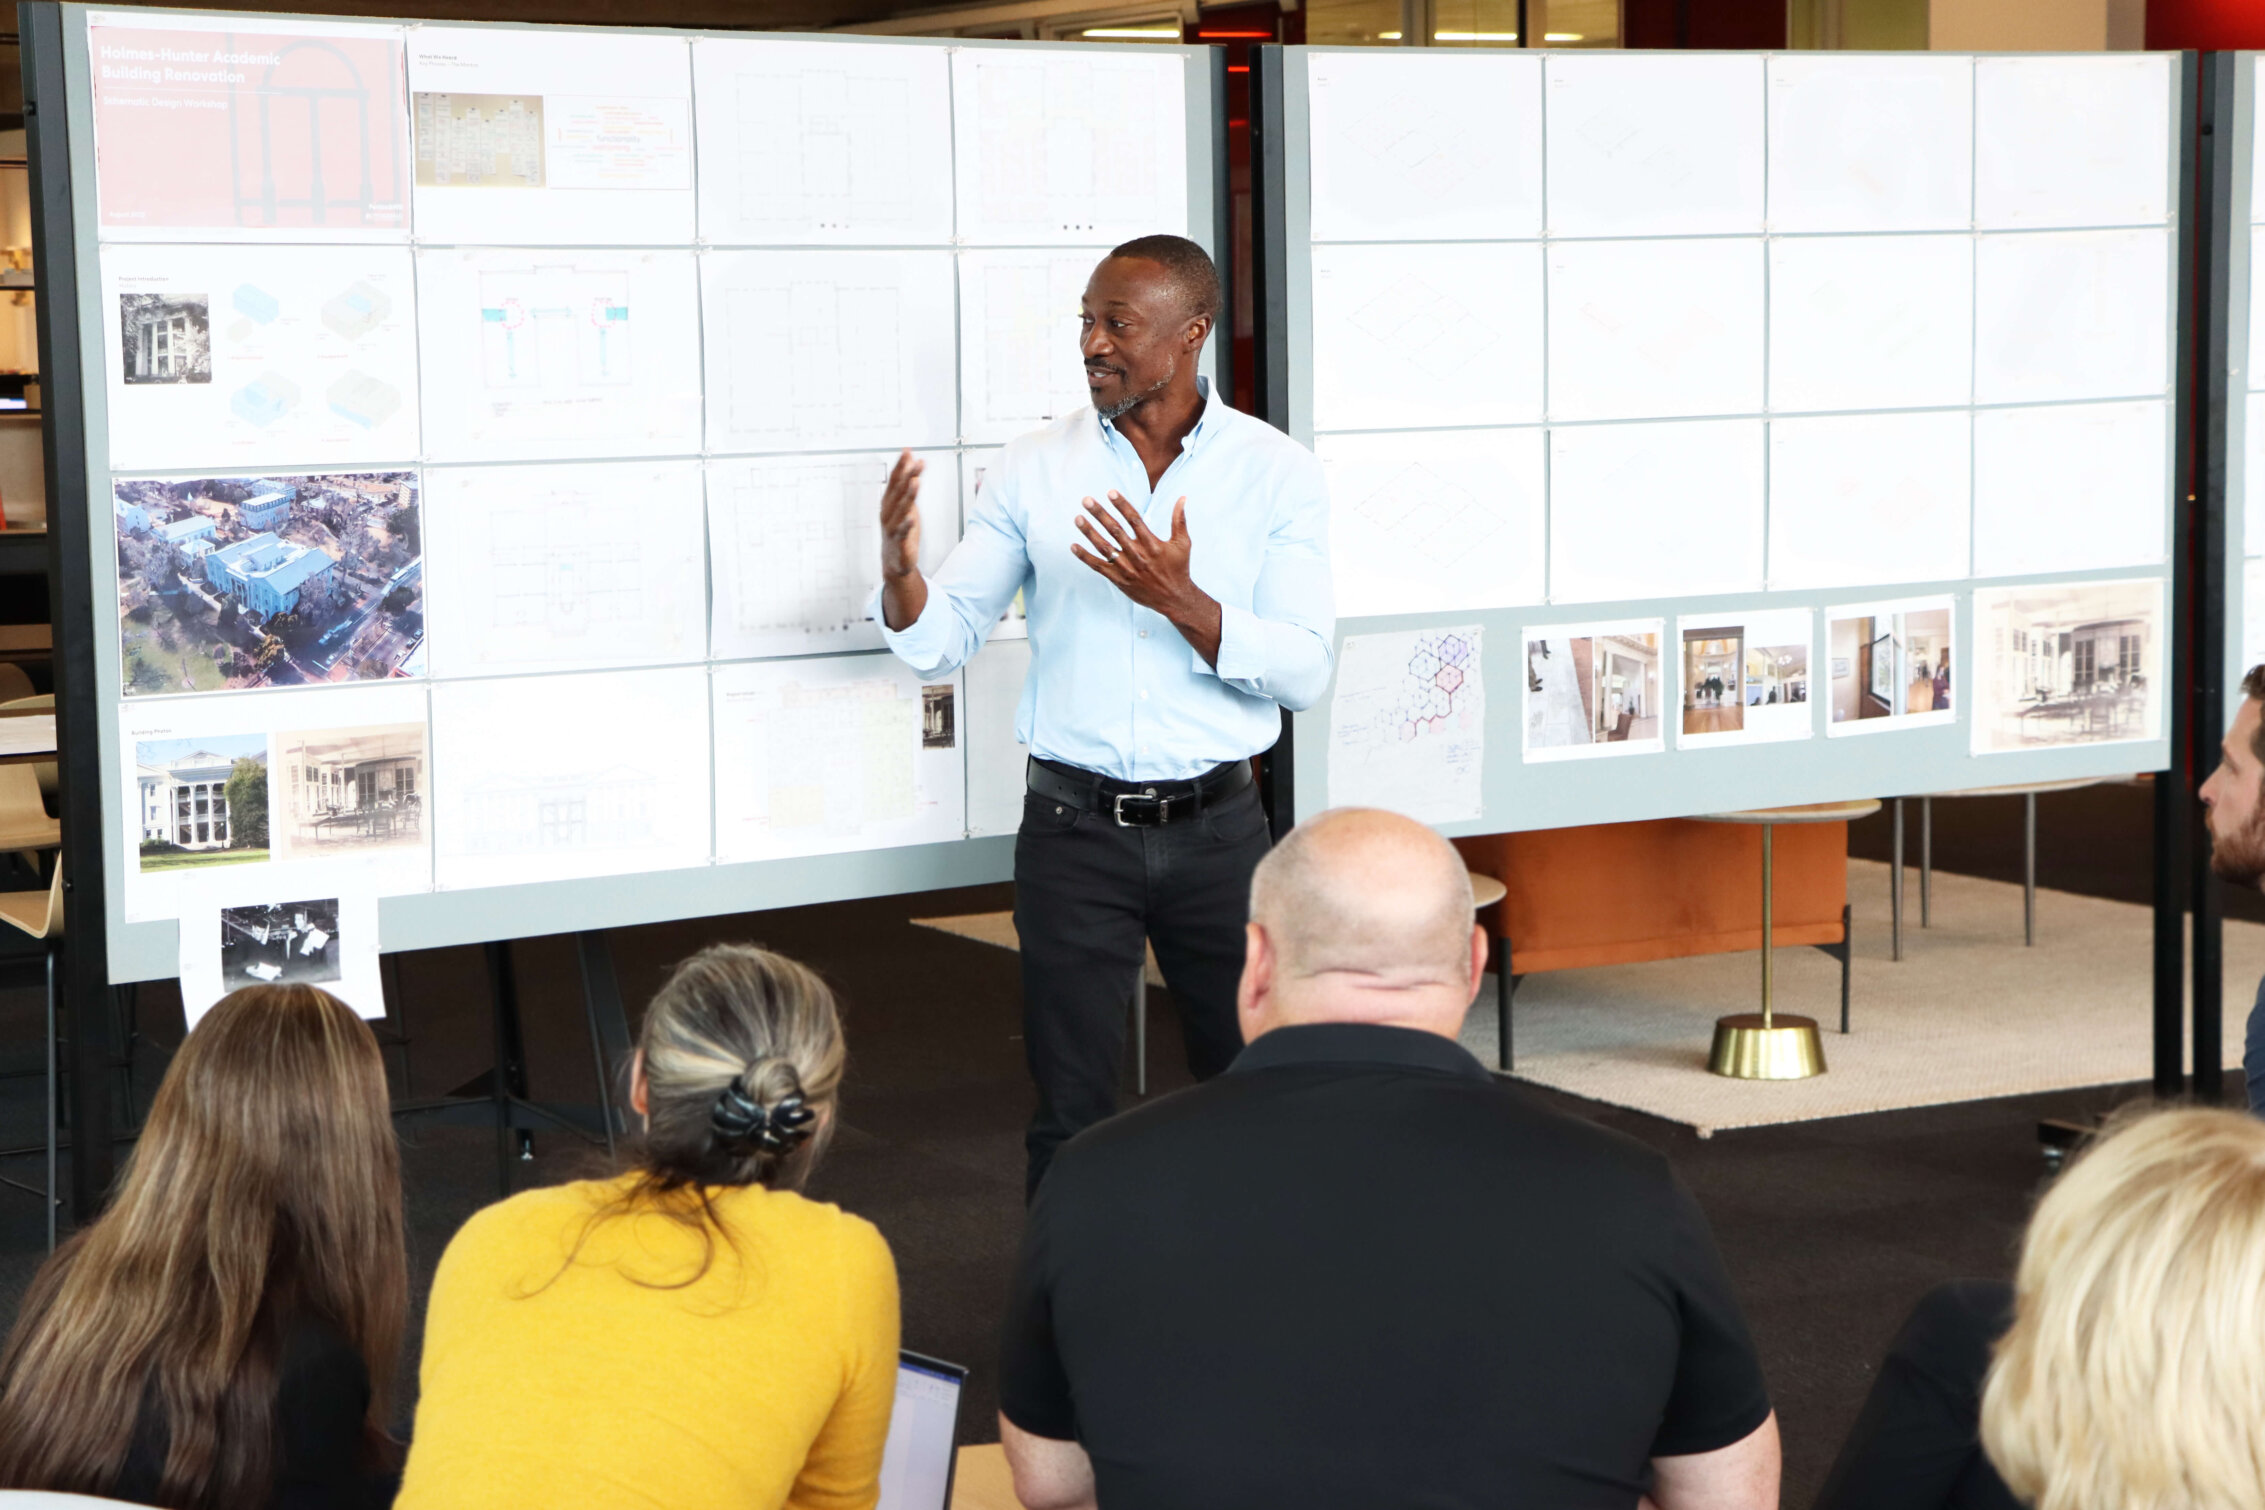 Godfrey Gaisie presents an ongoing project in front of a pinup wall for an Atlanta studio weekly Design Forum